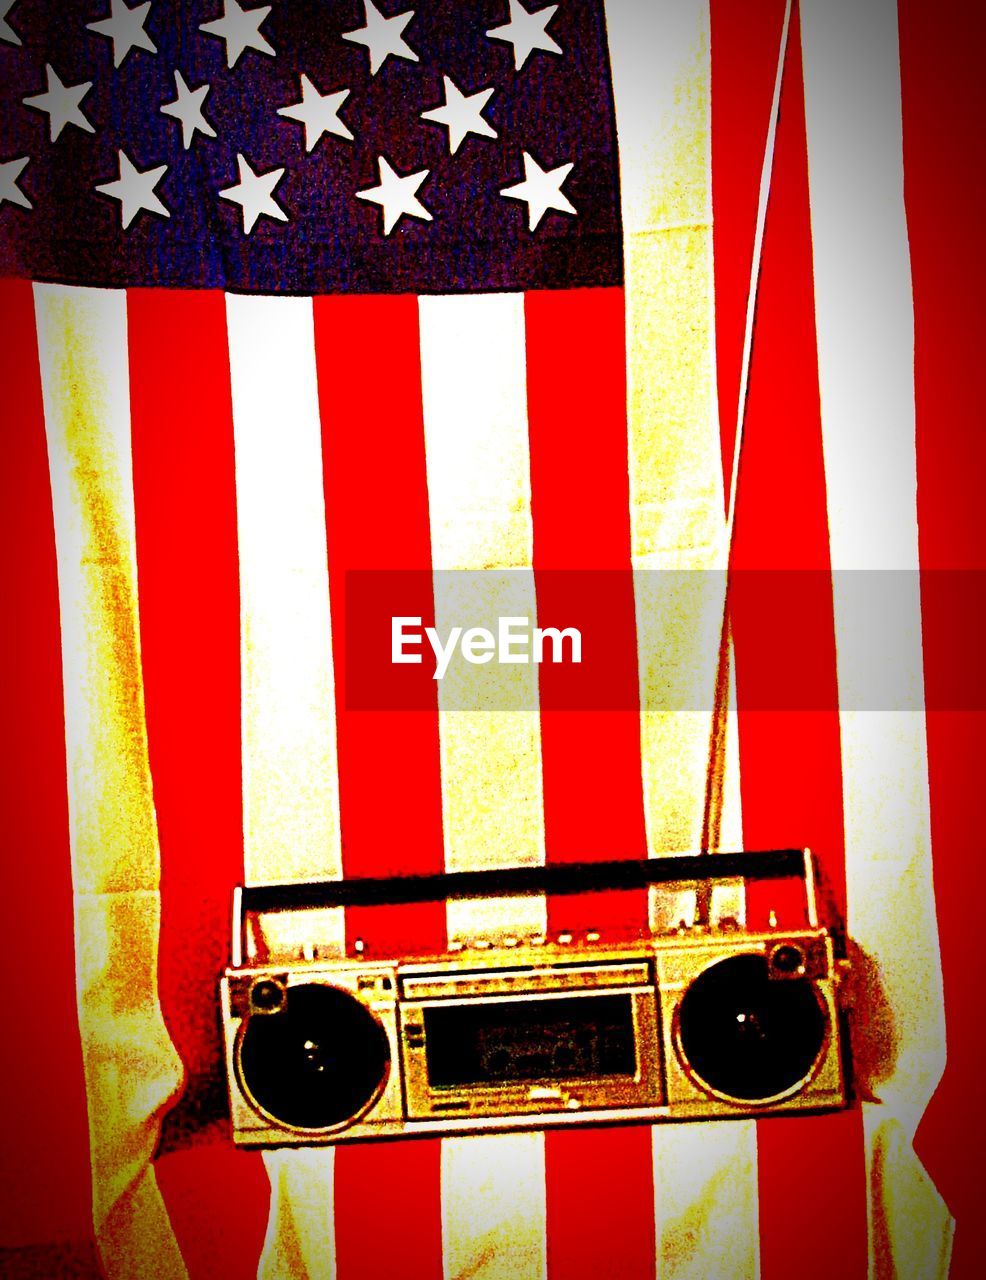 Vintage stereo with american flag